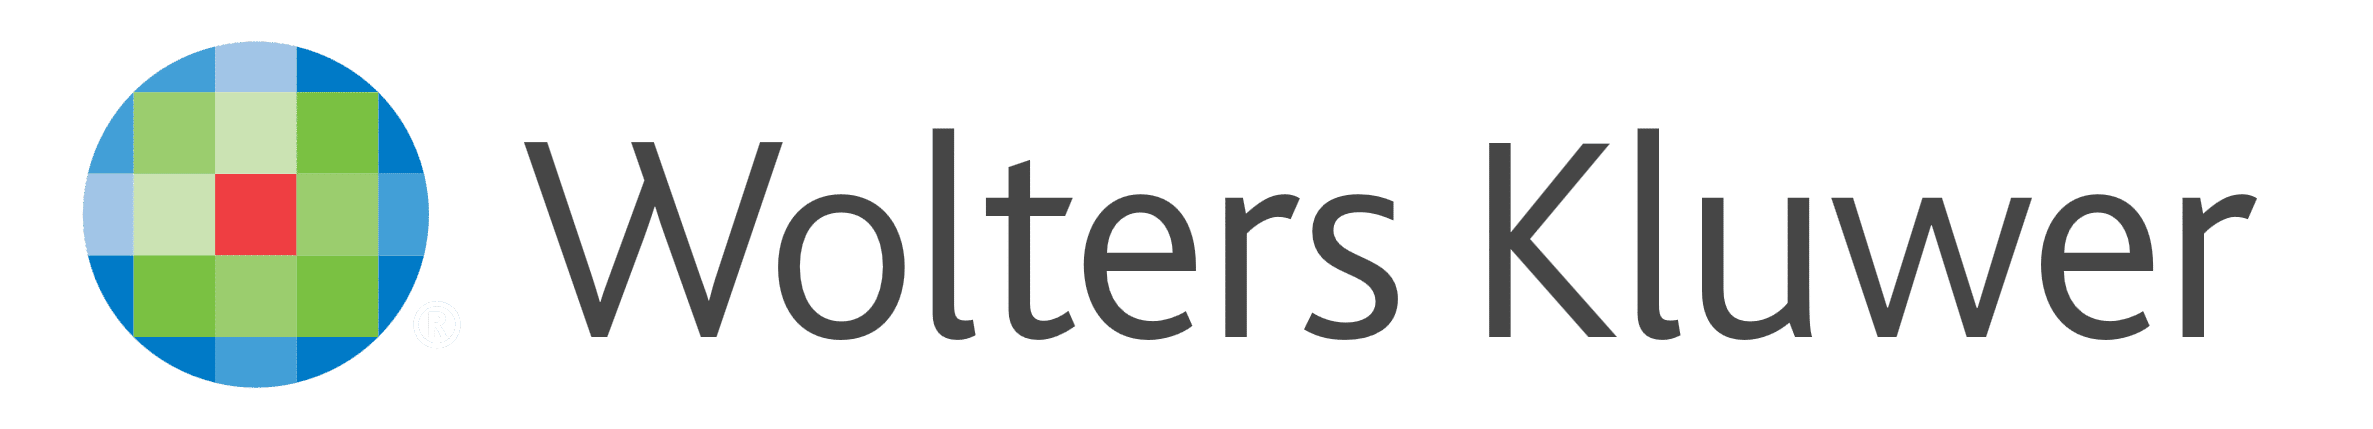 Wolters Kluwer-logo